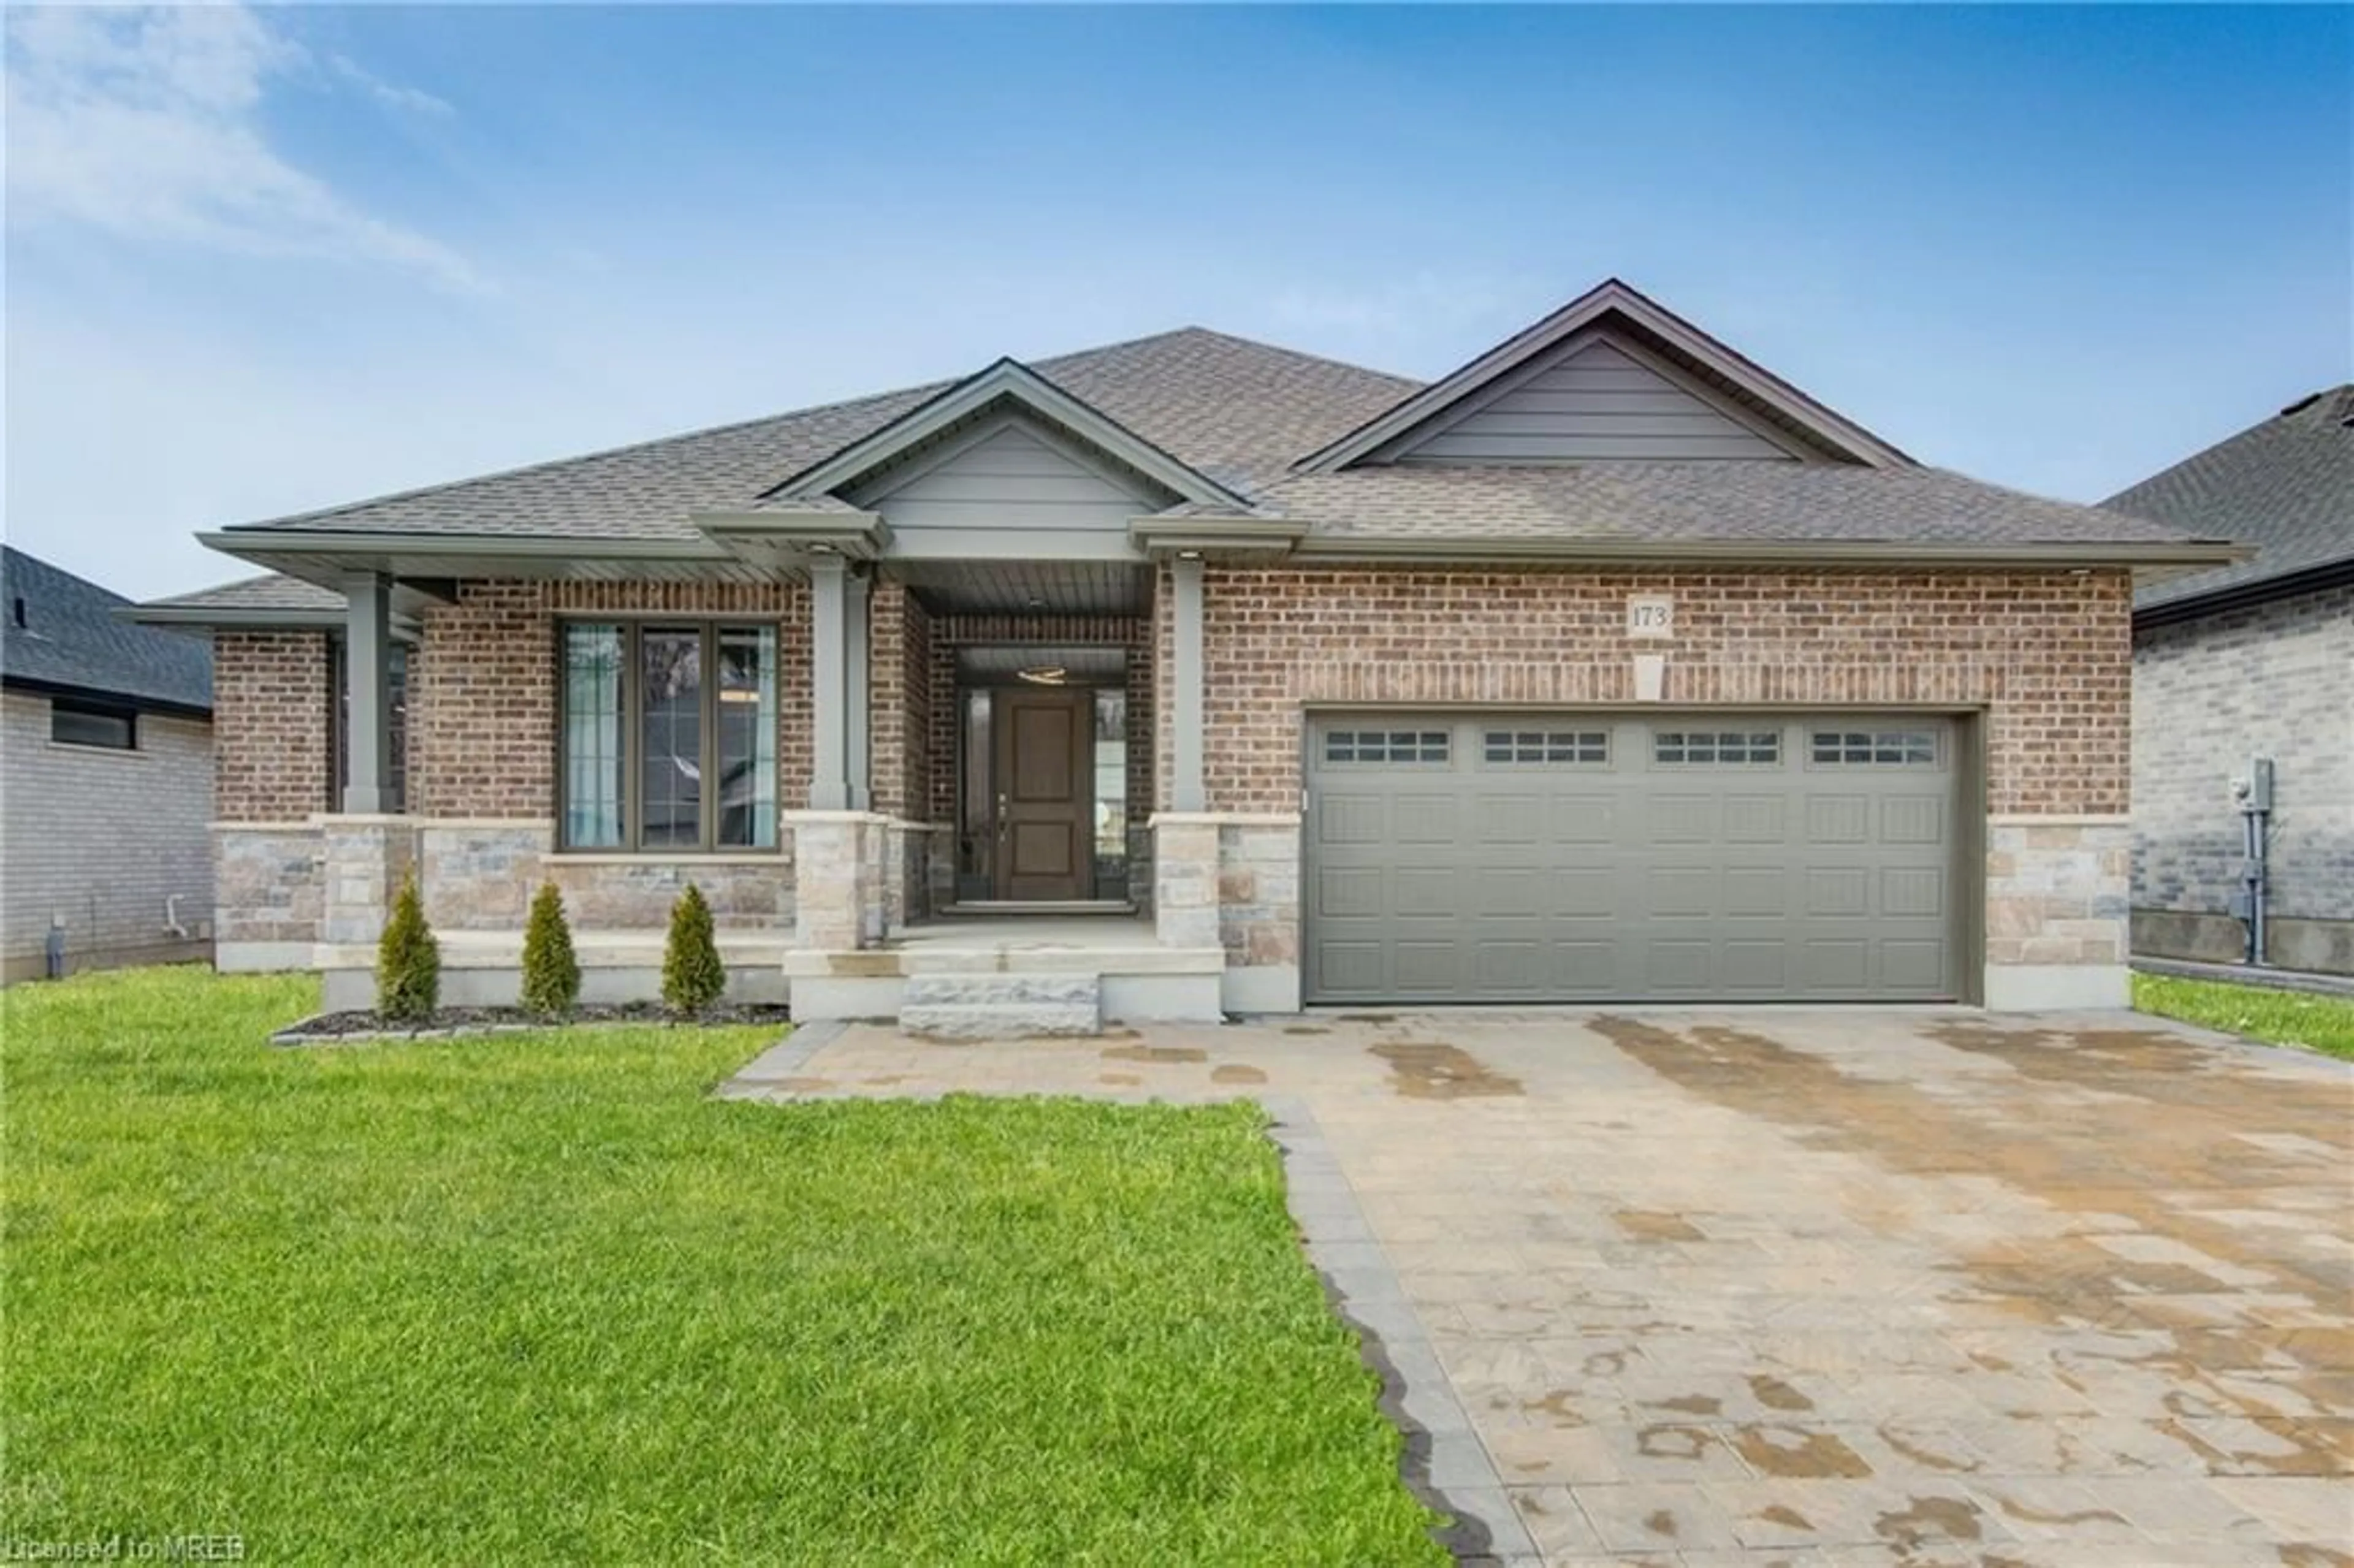 Home with brick exterior material for 173 Jennifers Trail, Thorndale Ontario N0M 2P0